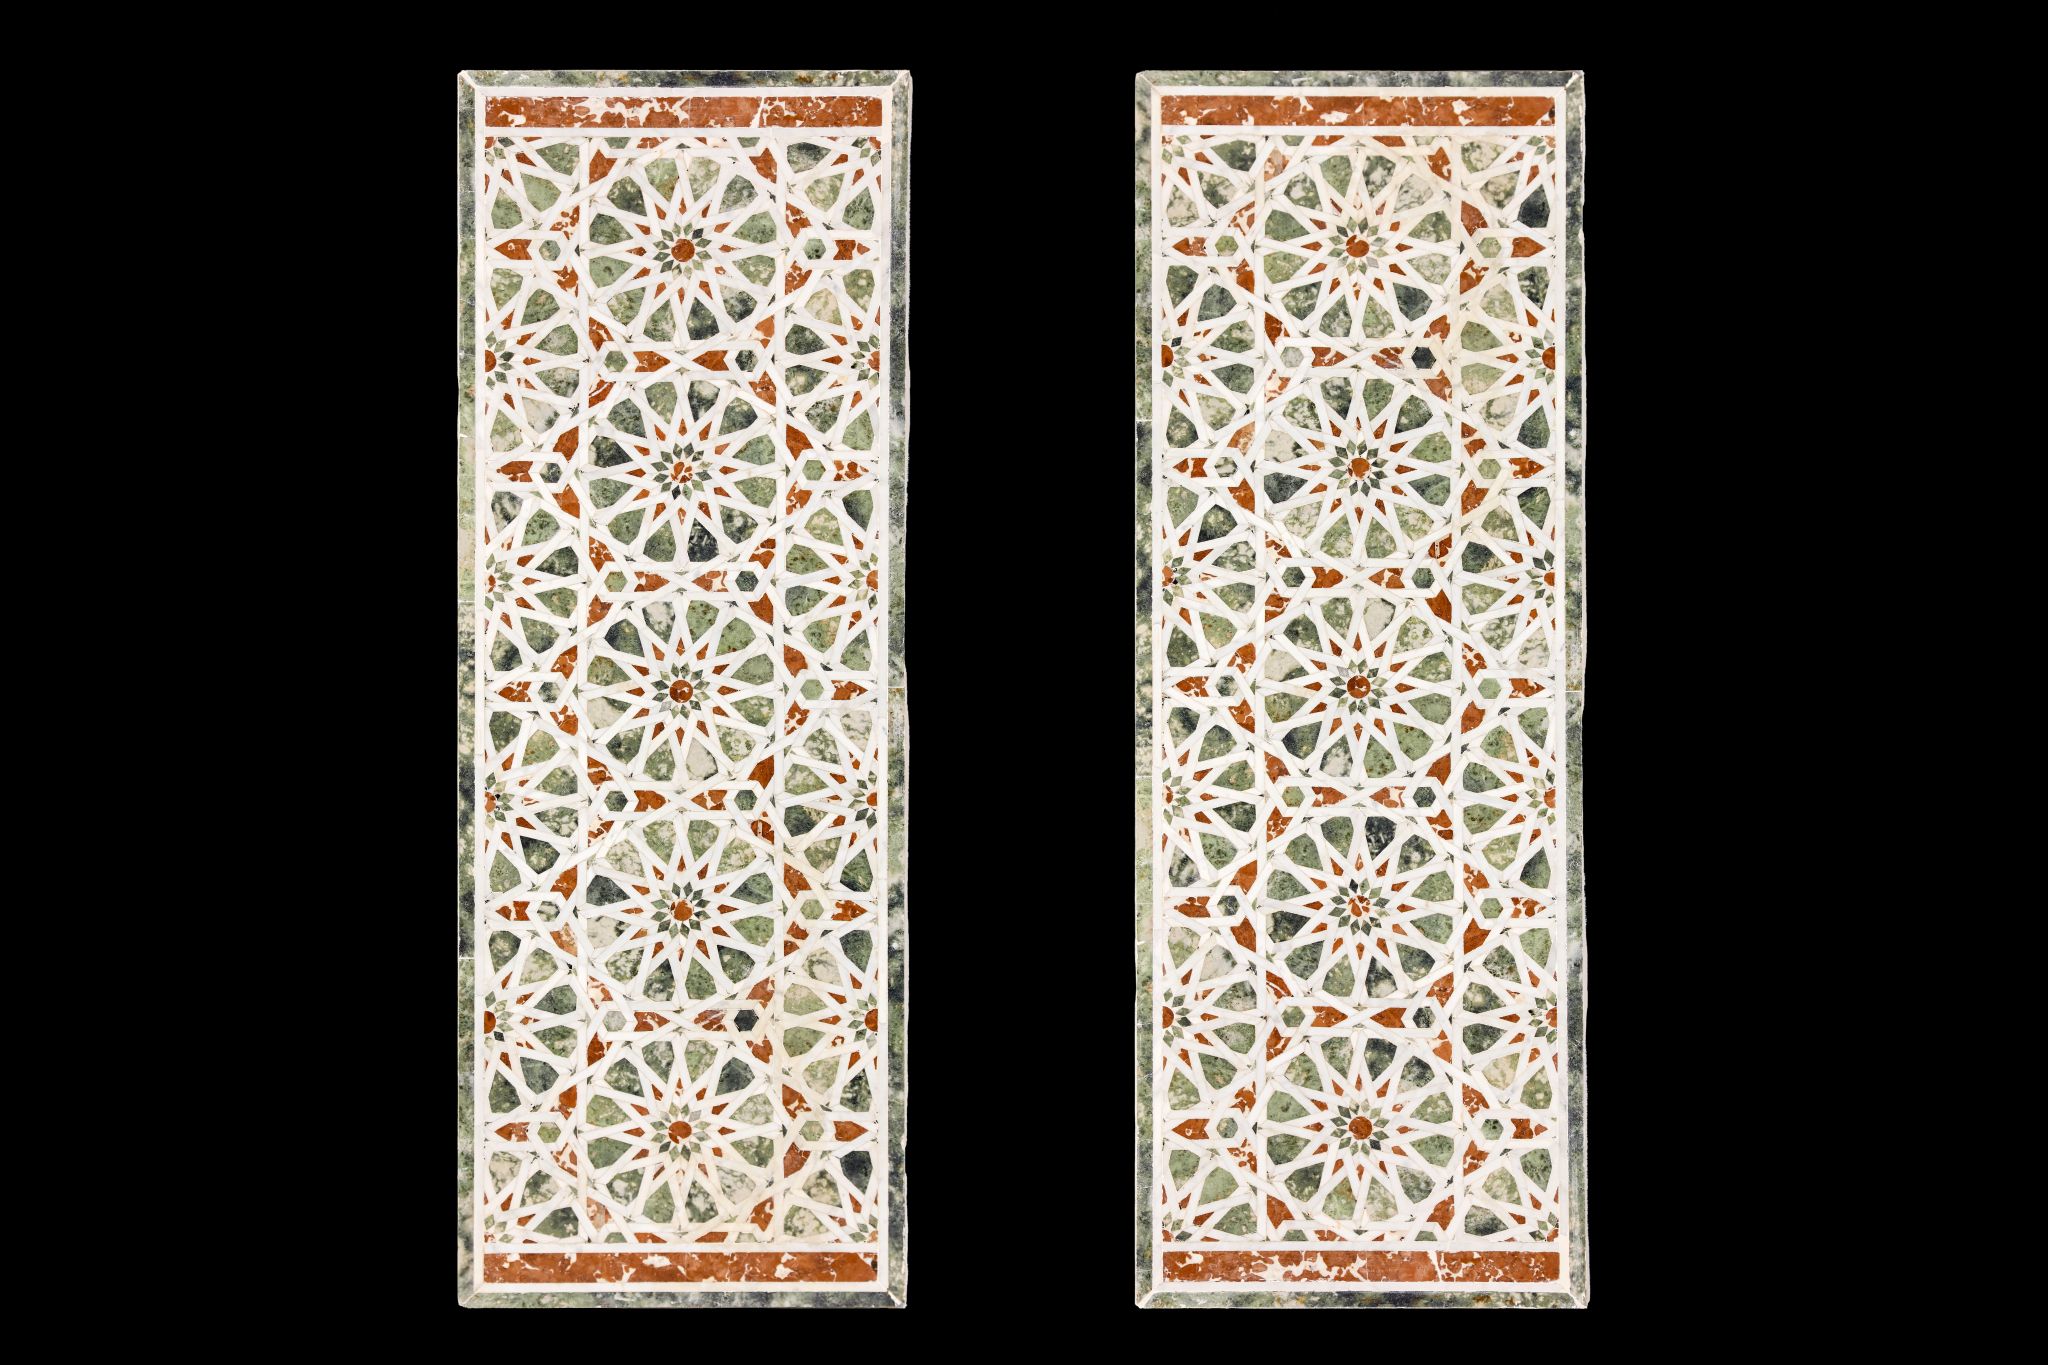 A RARE PAIR OF EGYPTIAN MARBLE MOSAIC PANELS PROBABLY EARLY OTTOMAN / LATE MAMLUK, 15TH / 17TH